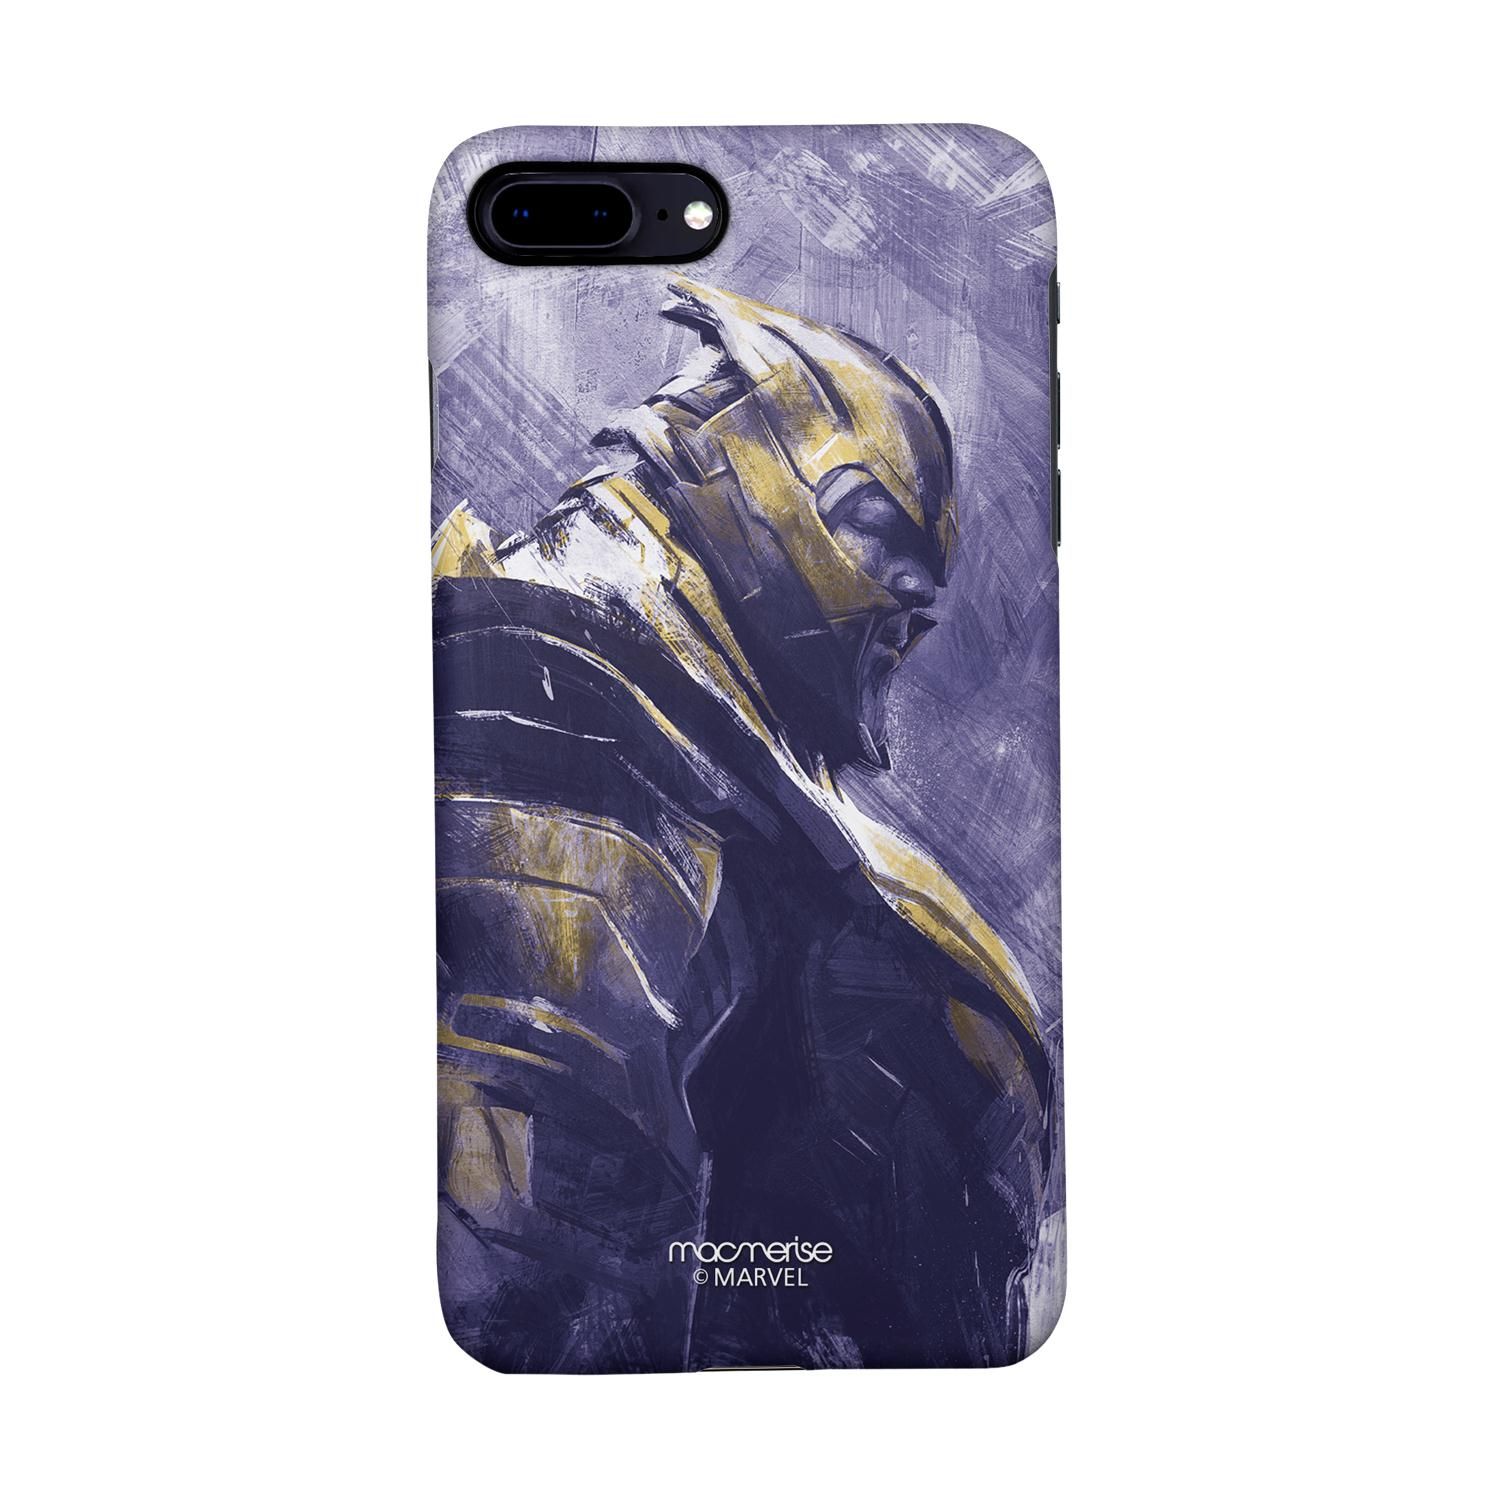 Buy Thanos suited up - Sleek Phone Case for iPhone 8 Plus Online